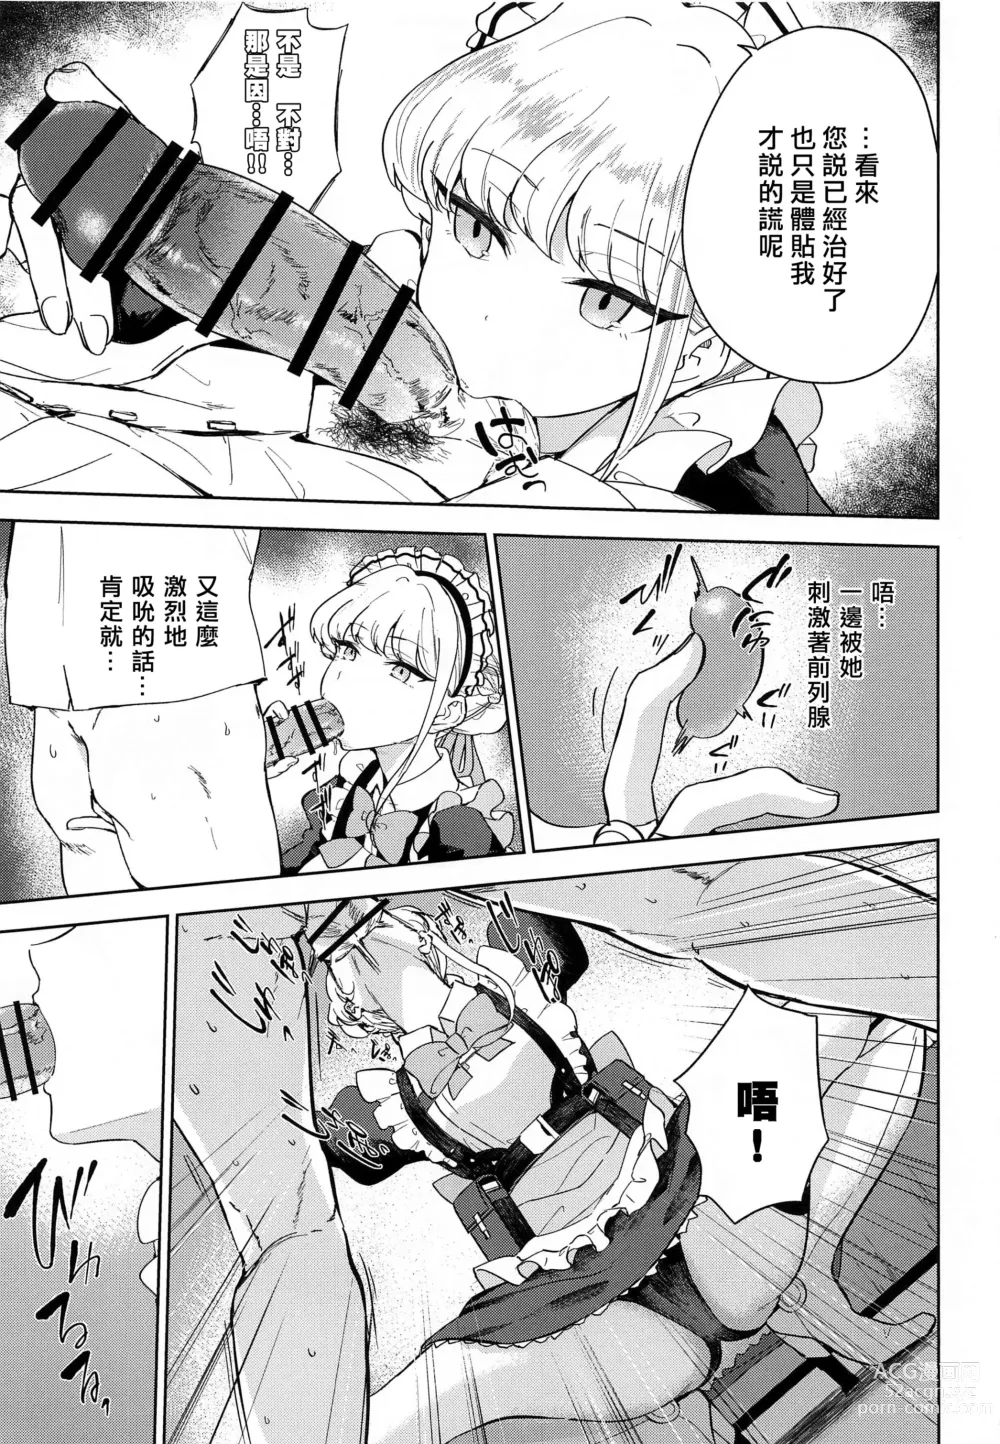 Page 6 of doujinshi Made in Maid